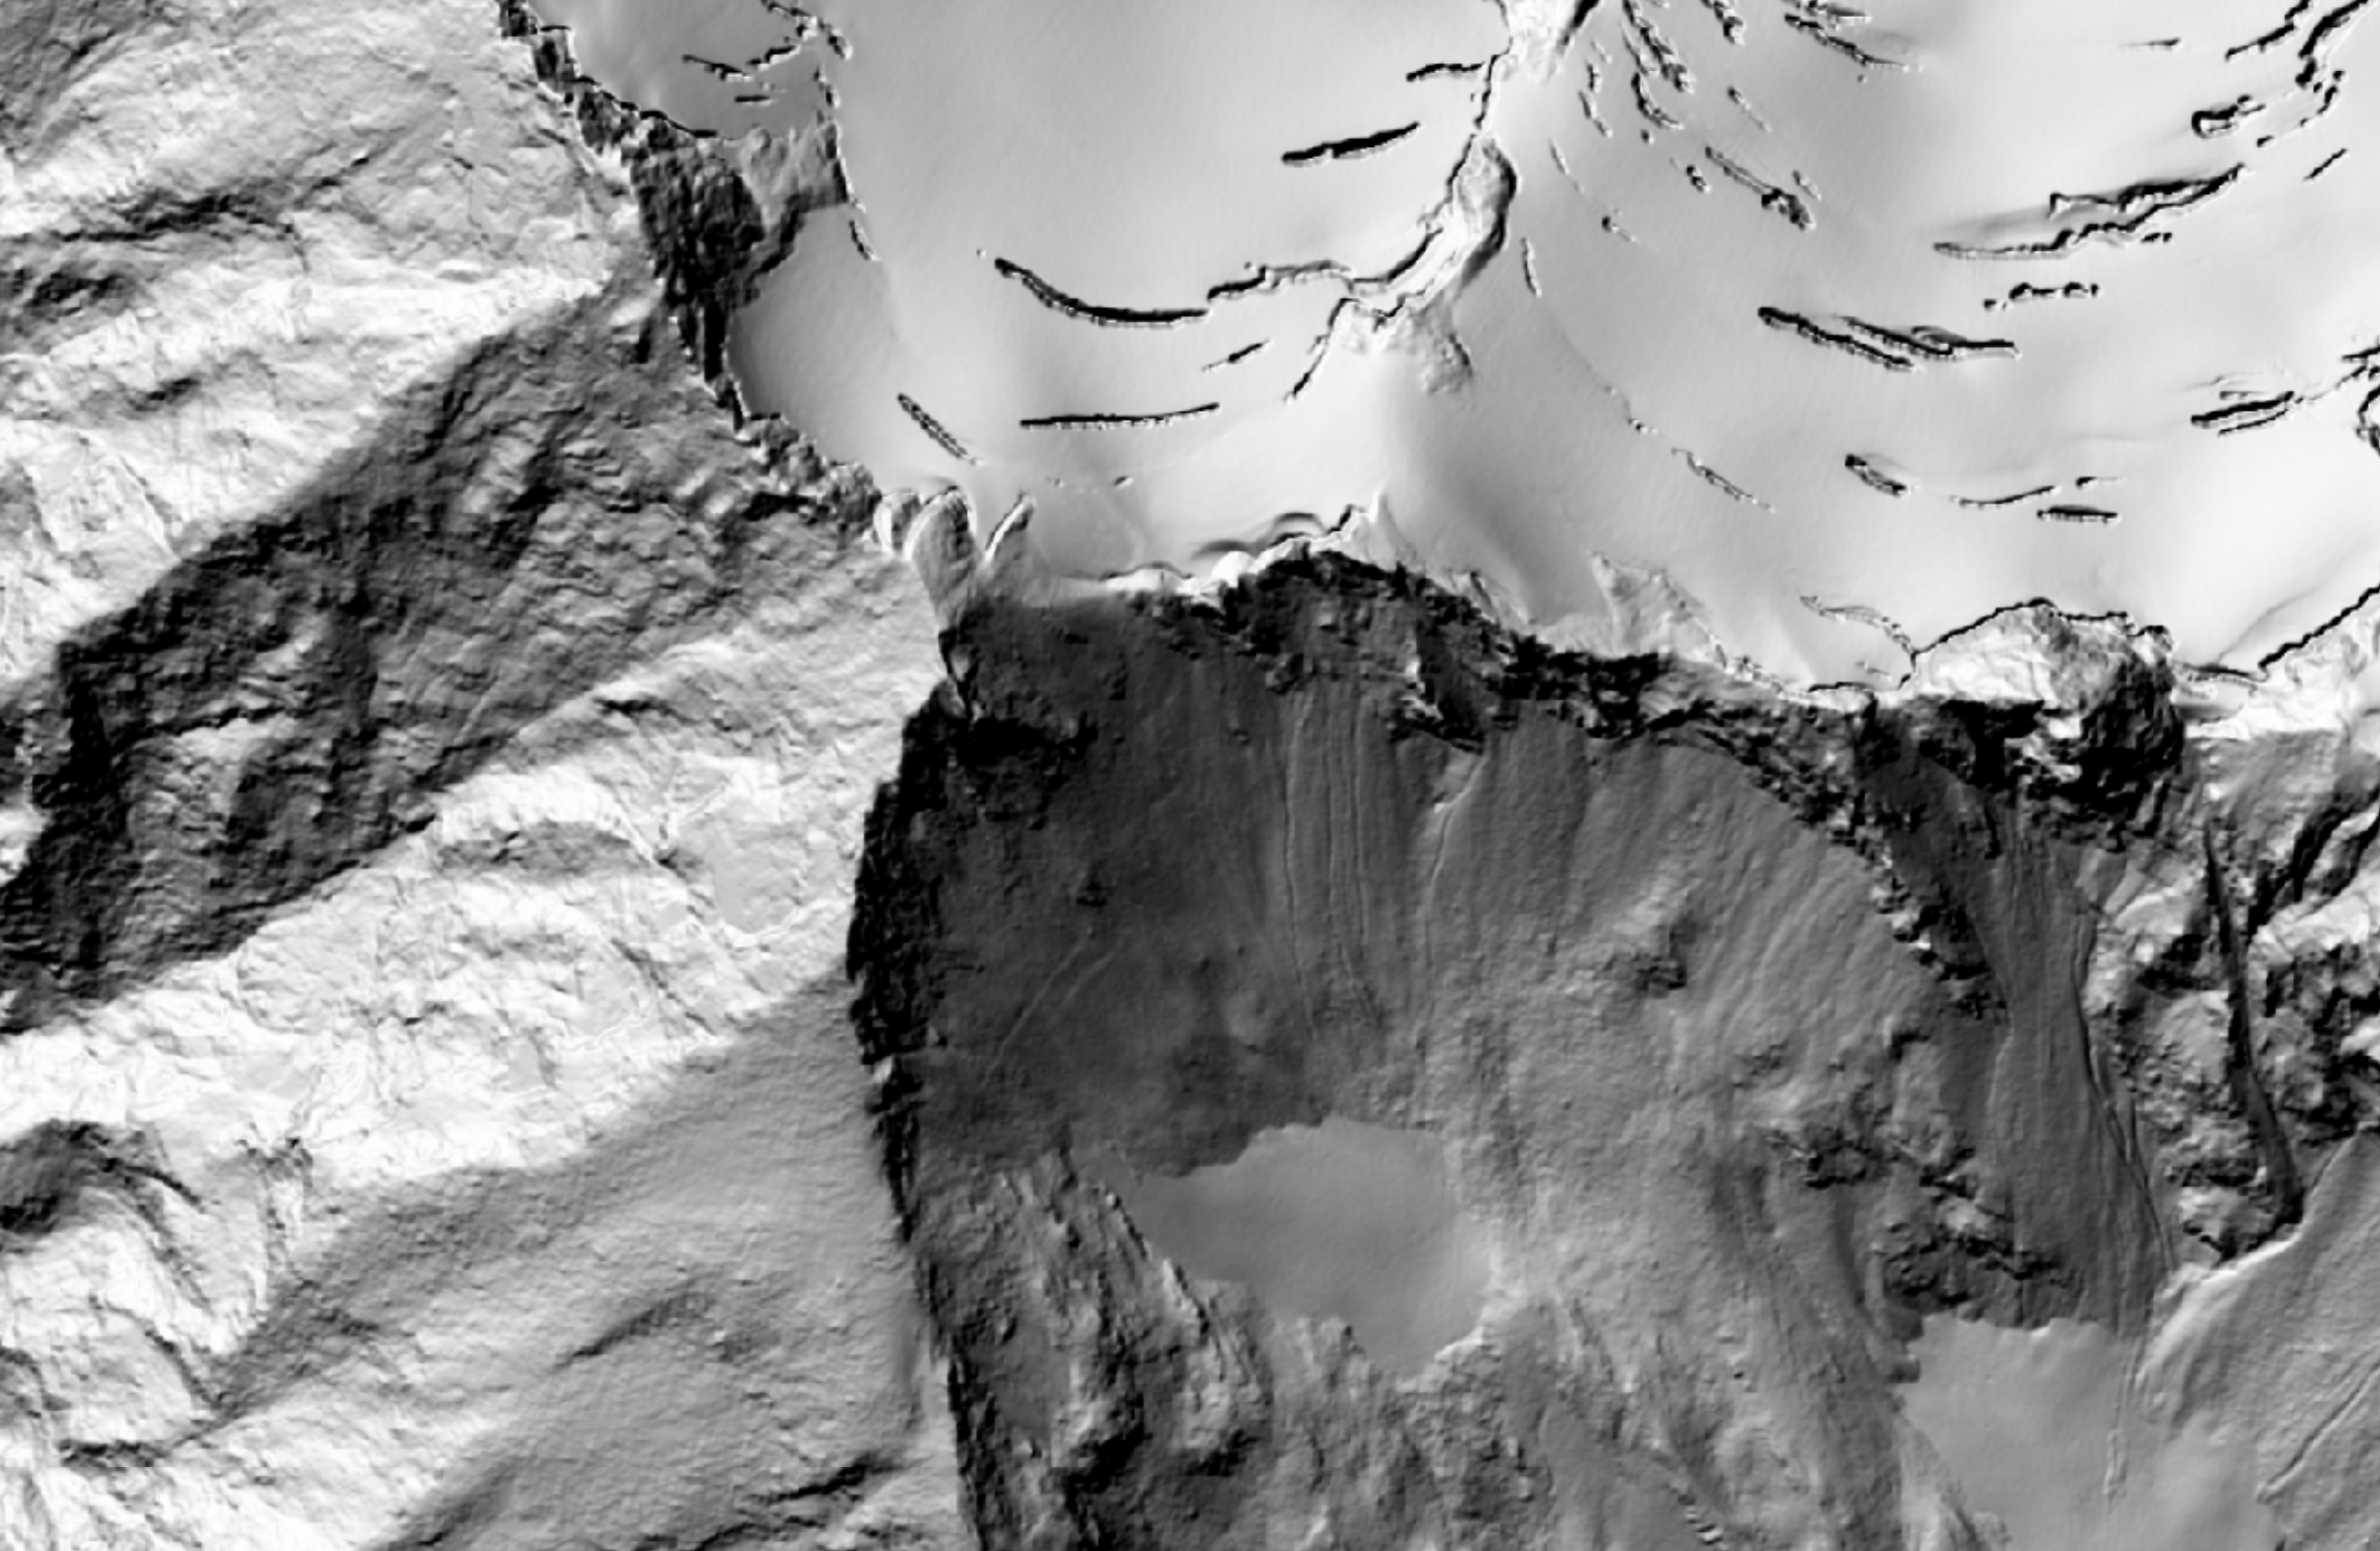 LiDAR map of Clark Mountain area, showing glaciers and streams